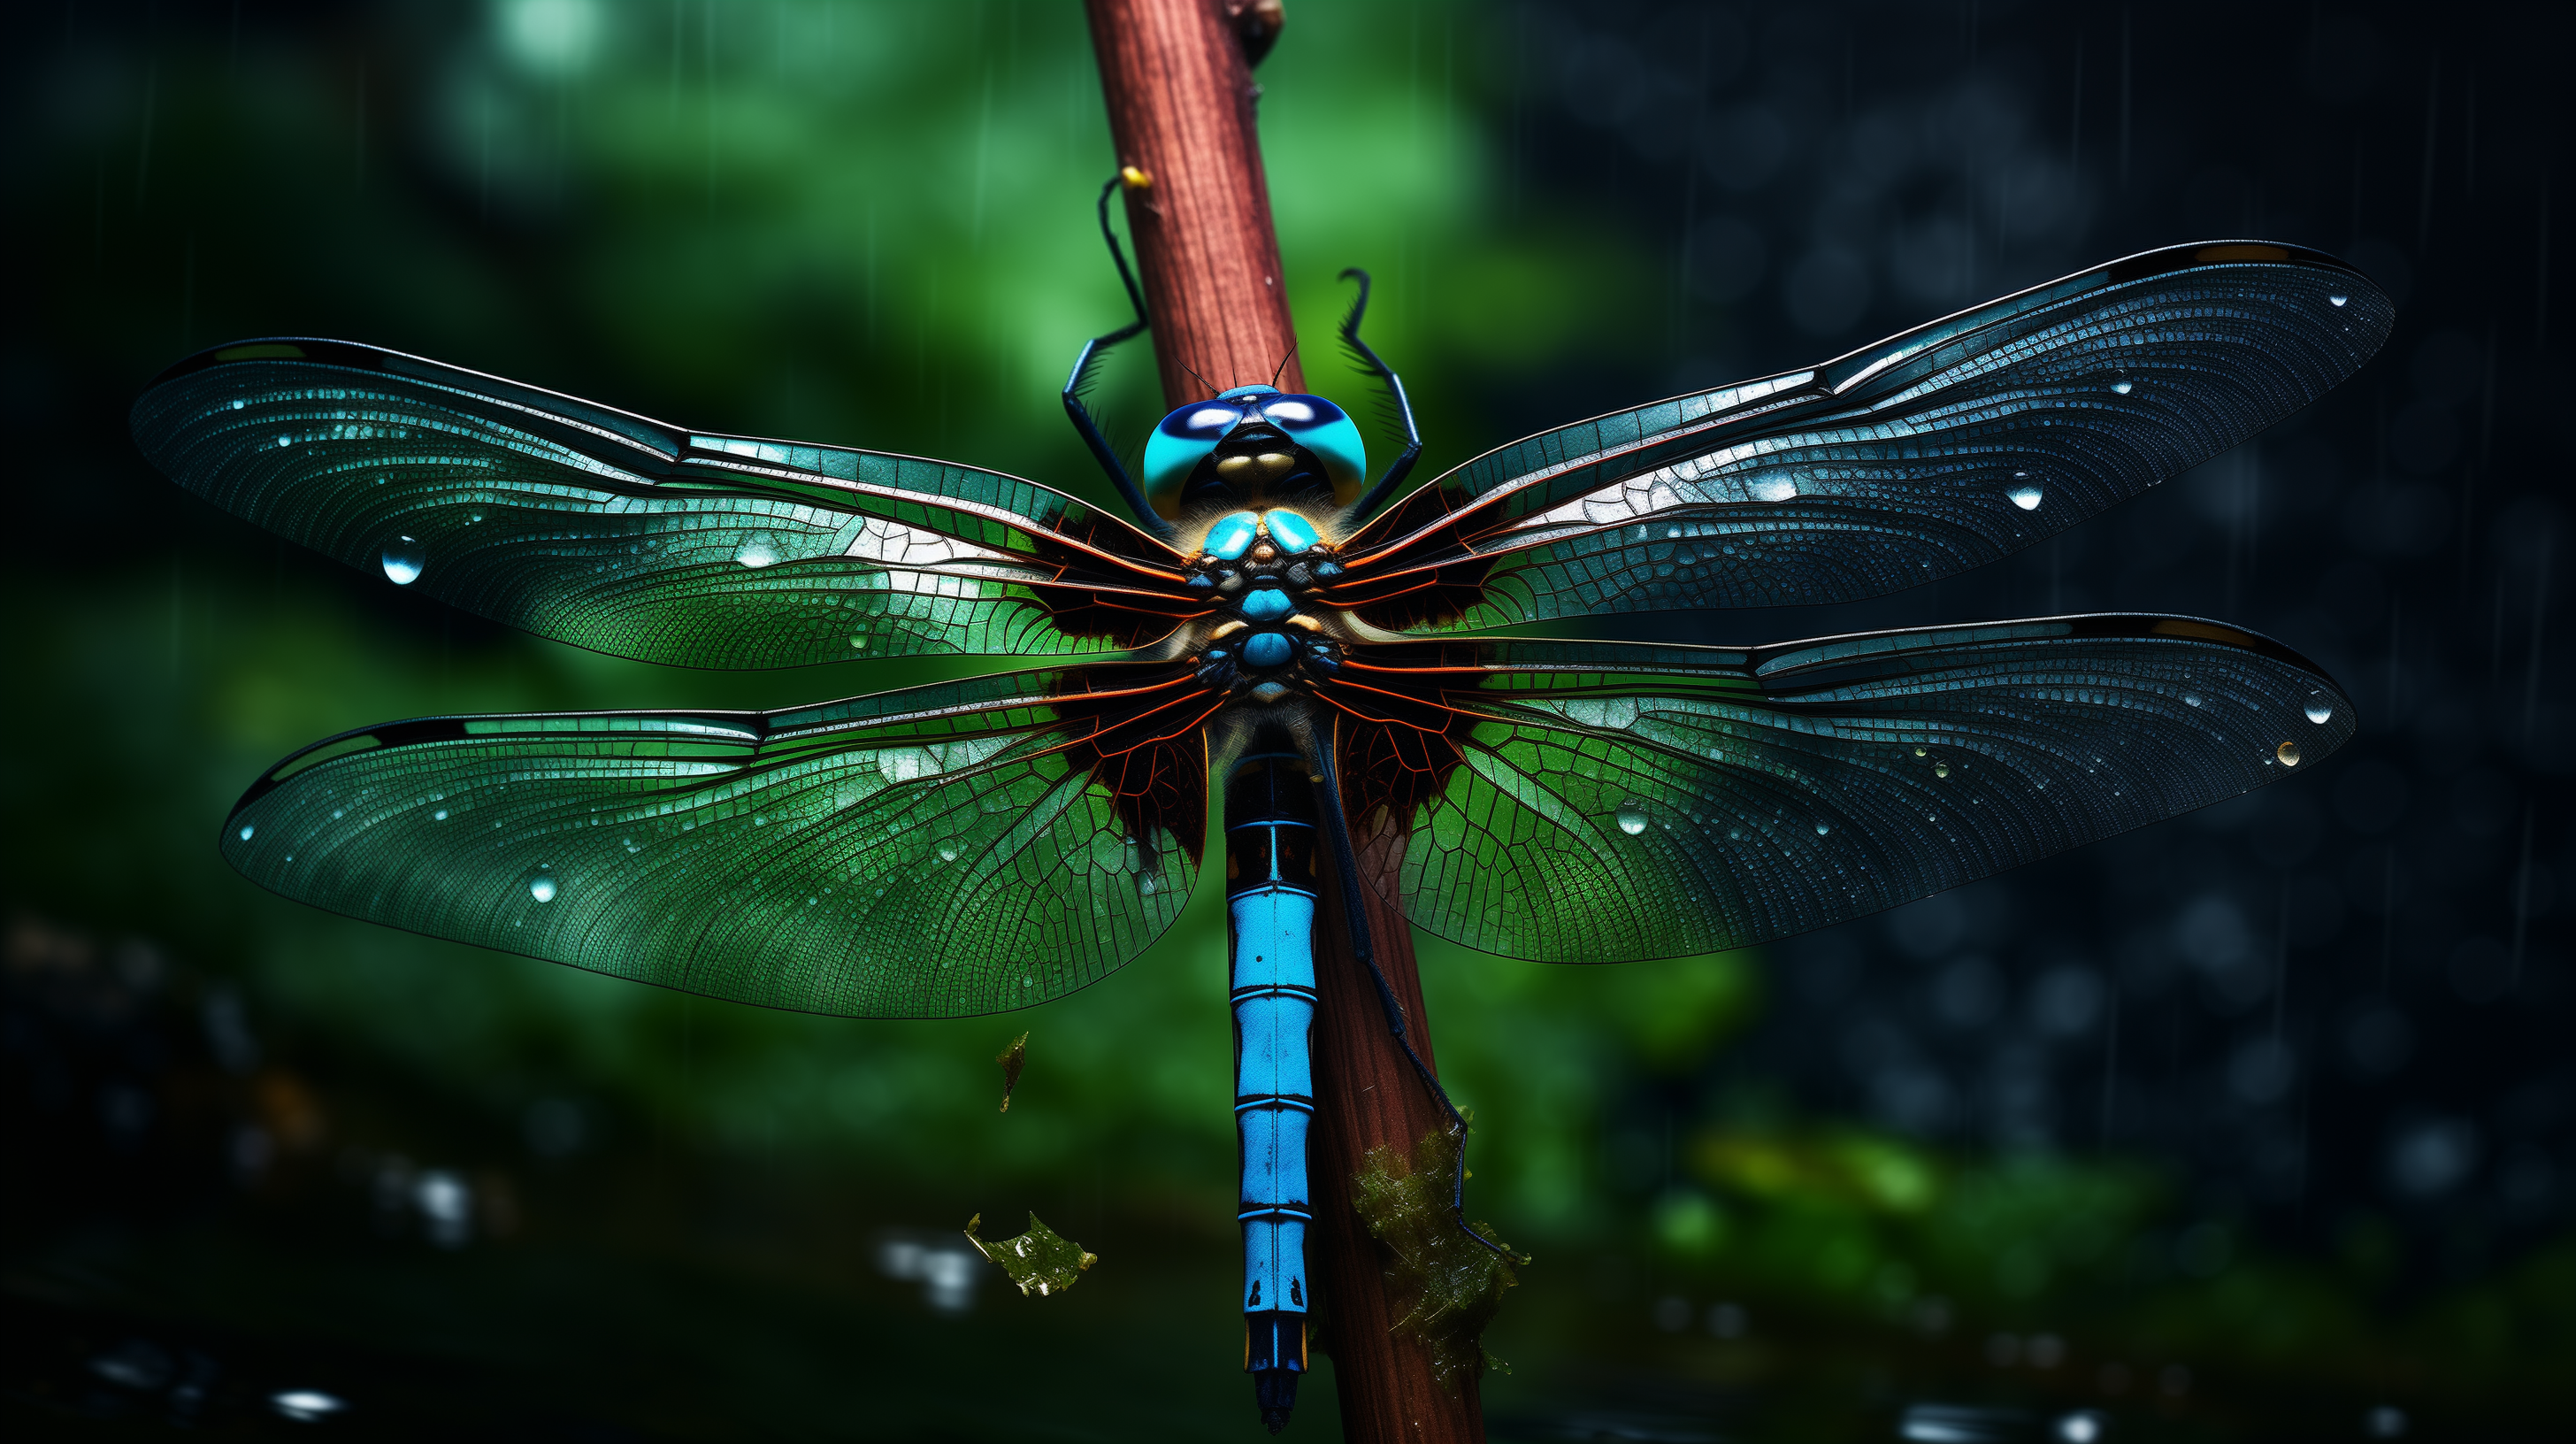 HD wallpaper of a vibrant blue dragonfly perched on a twig with dew drops and a blurred green background.